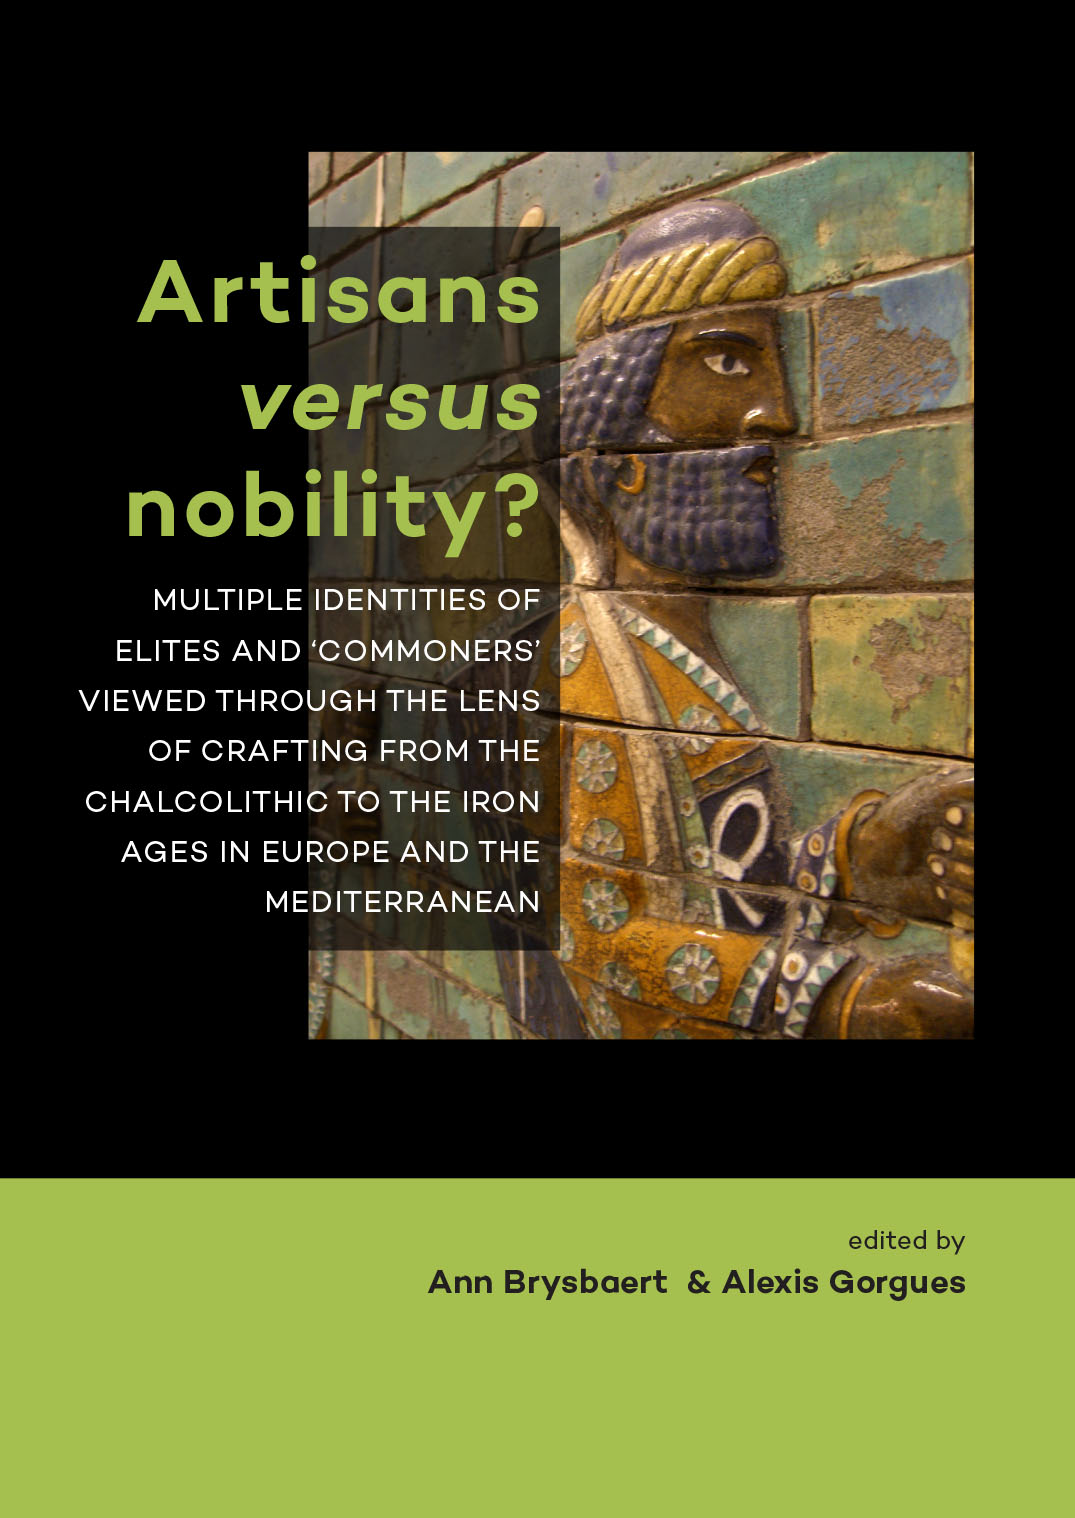 Artisans versus nobility ? Multiple identities of elites and 'commoners' viewed through the lens of crafting from the Chalcolithic to the Iron Ages in Europe and the Mediterranean, 2017, 222 p.